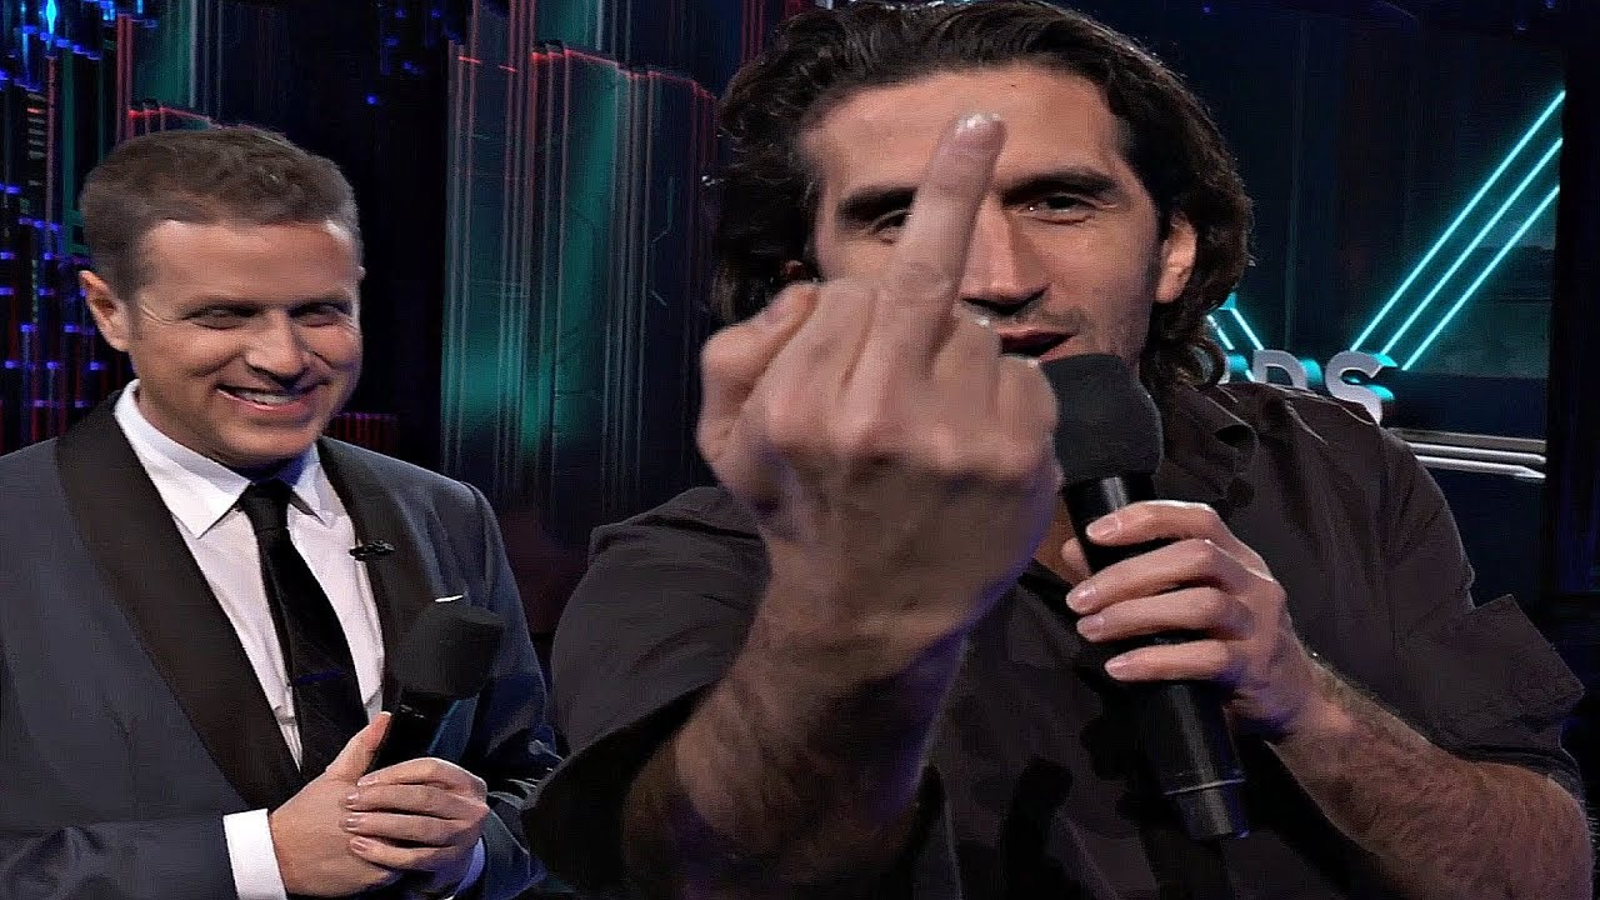 Josef Fares Guarantees $1,000 To Anyone Who Gets Tired Of It Takes Two